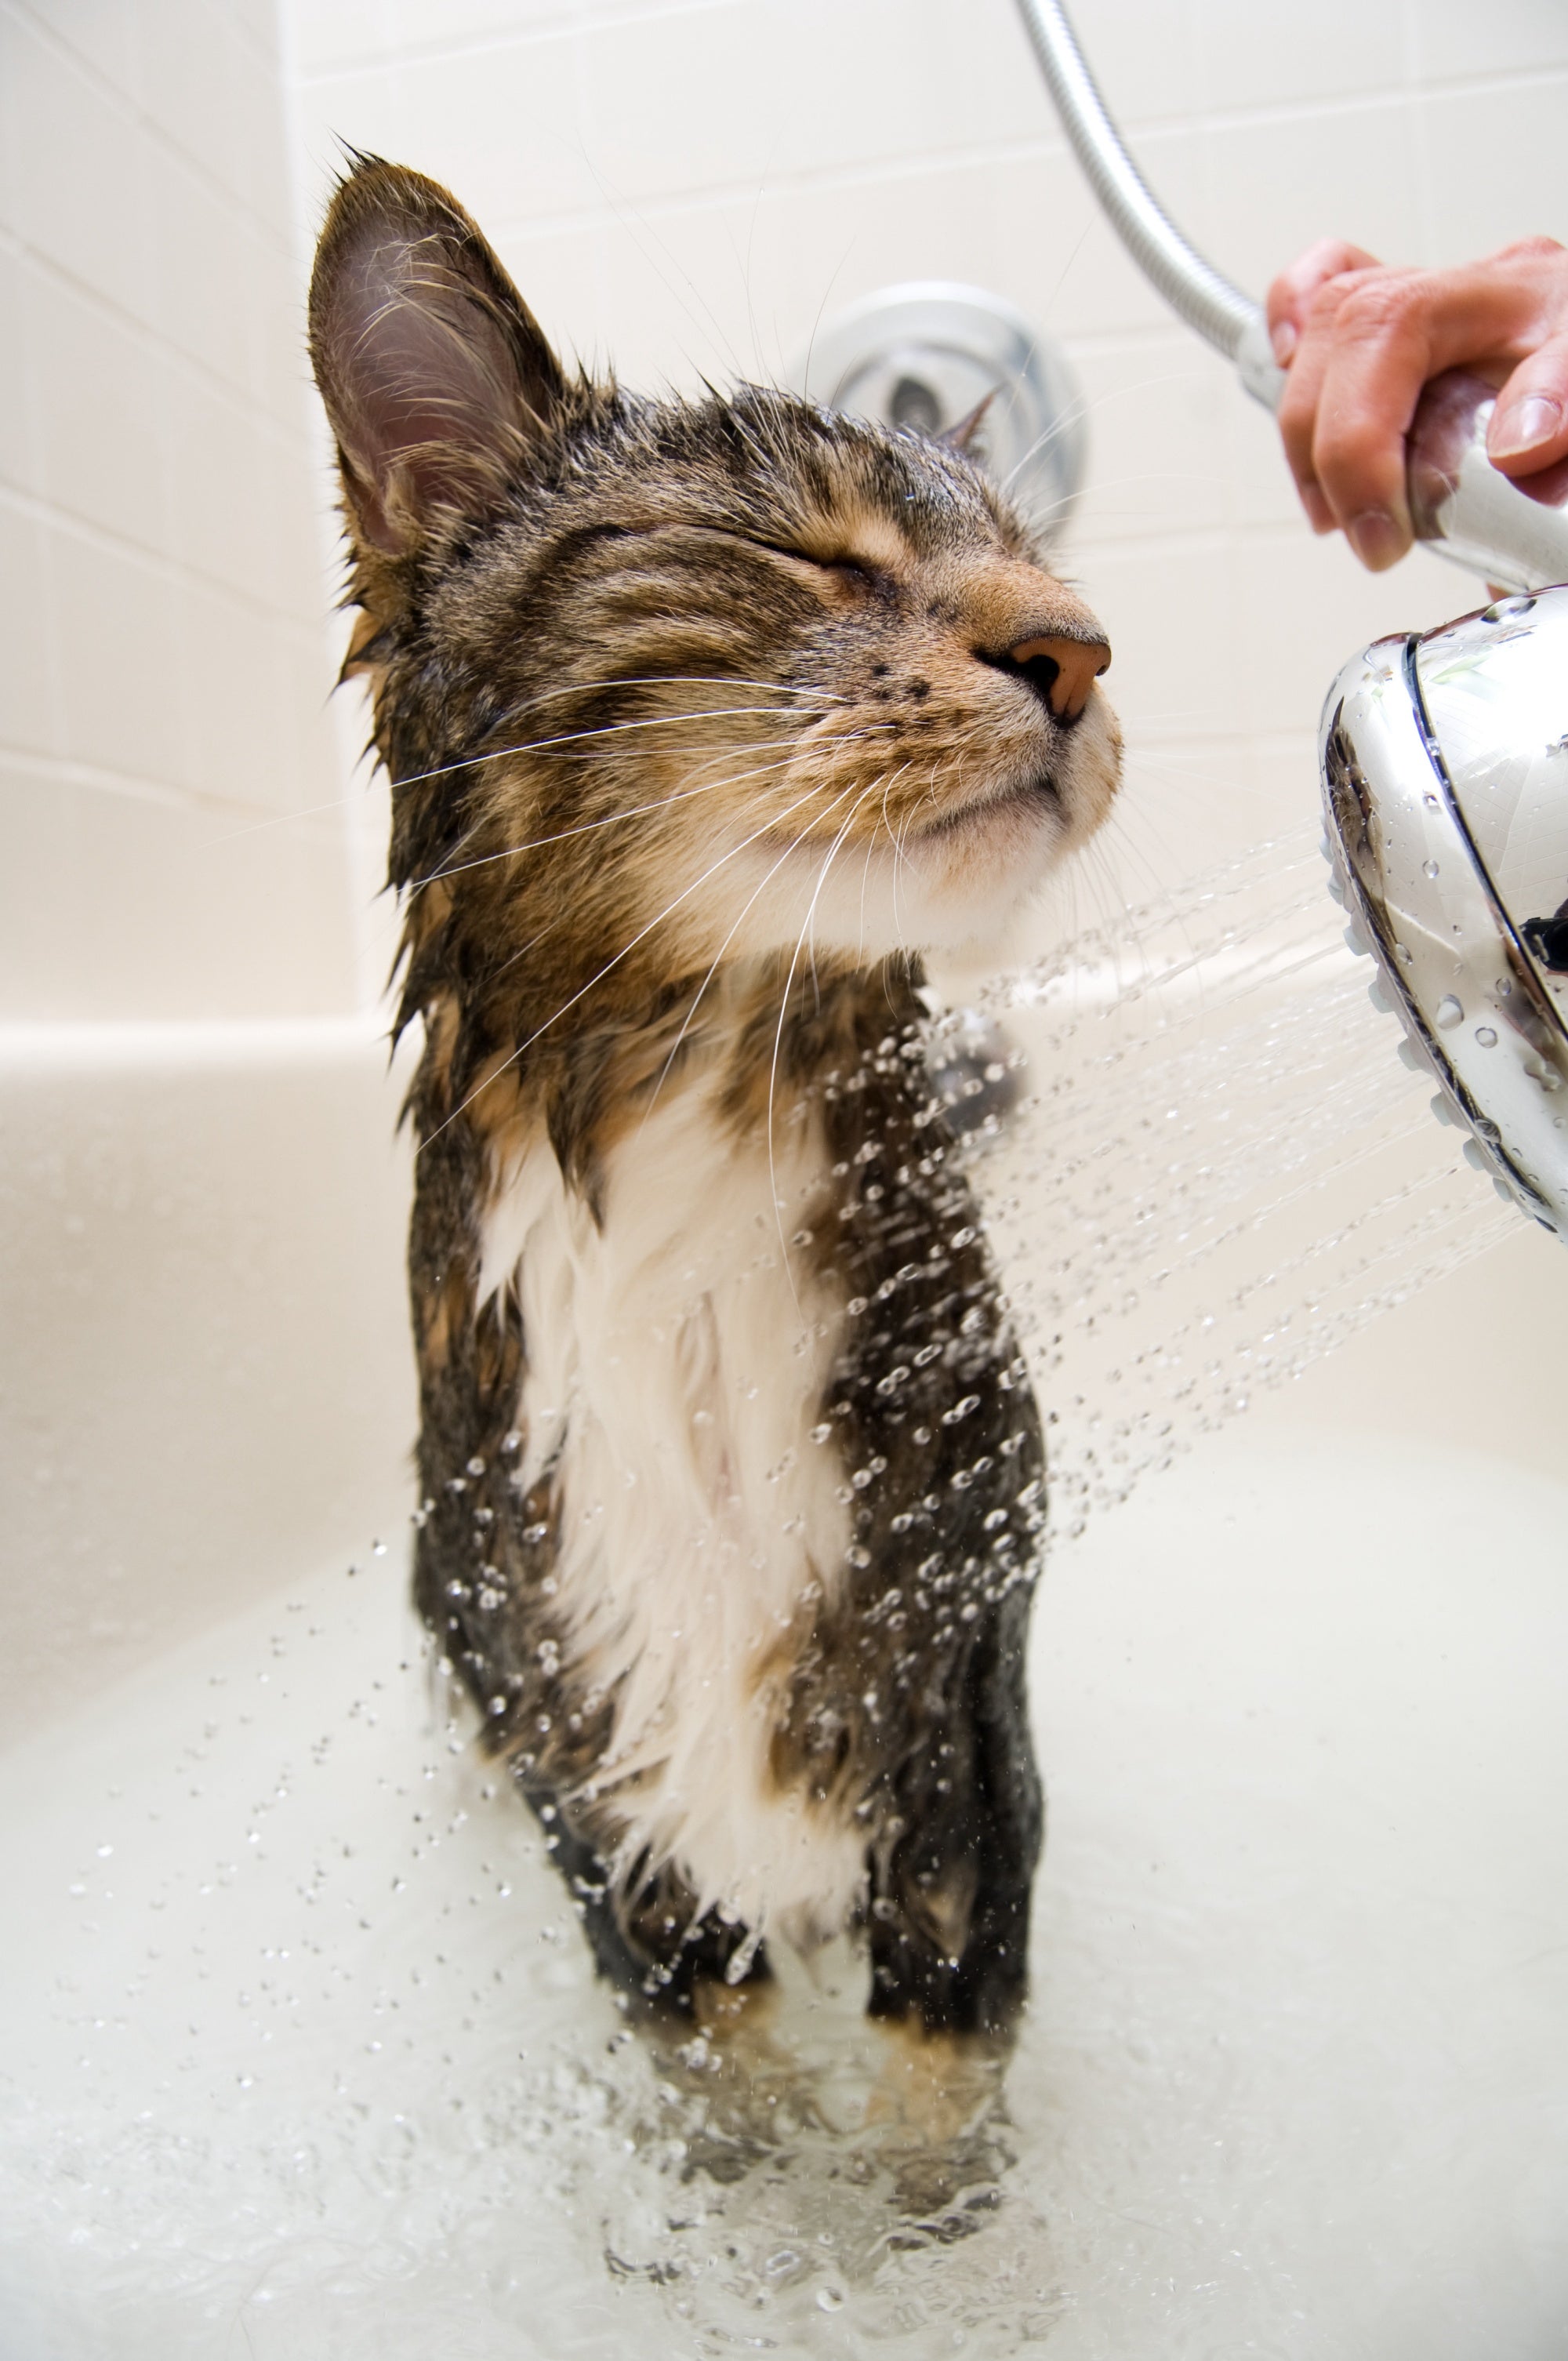 Bathing Tips To Help You Remain Scratch-Free!